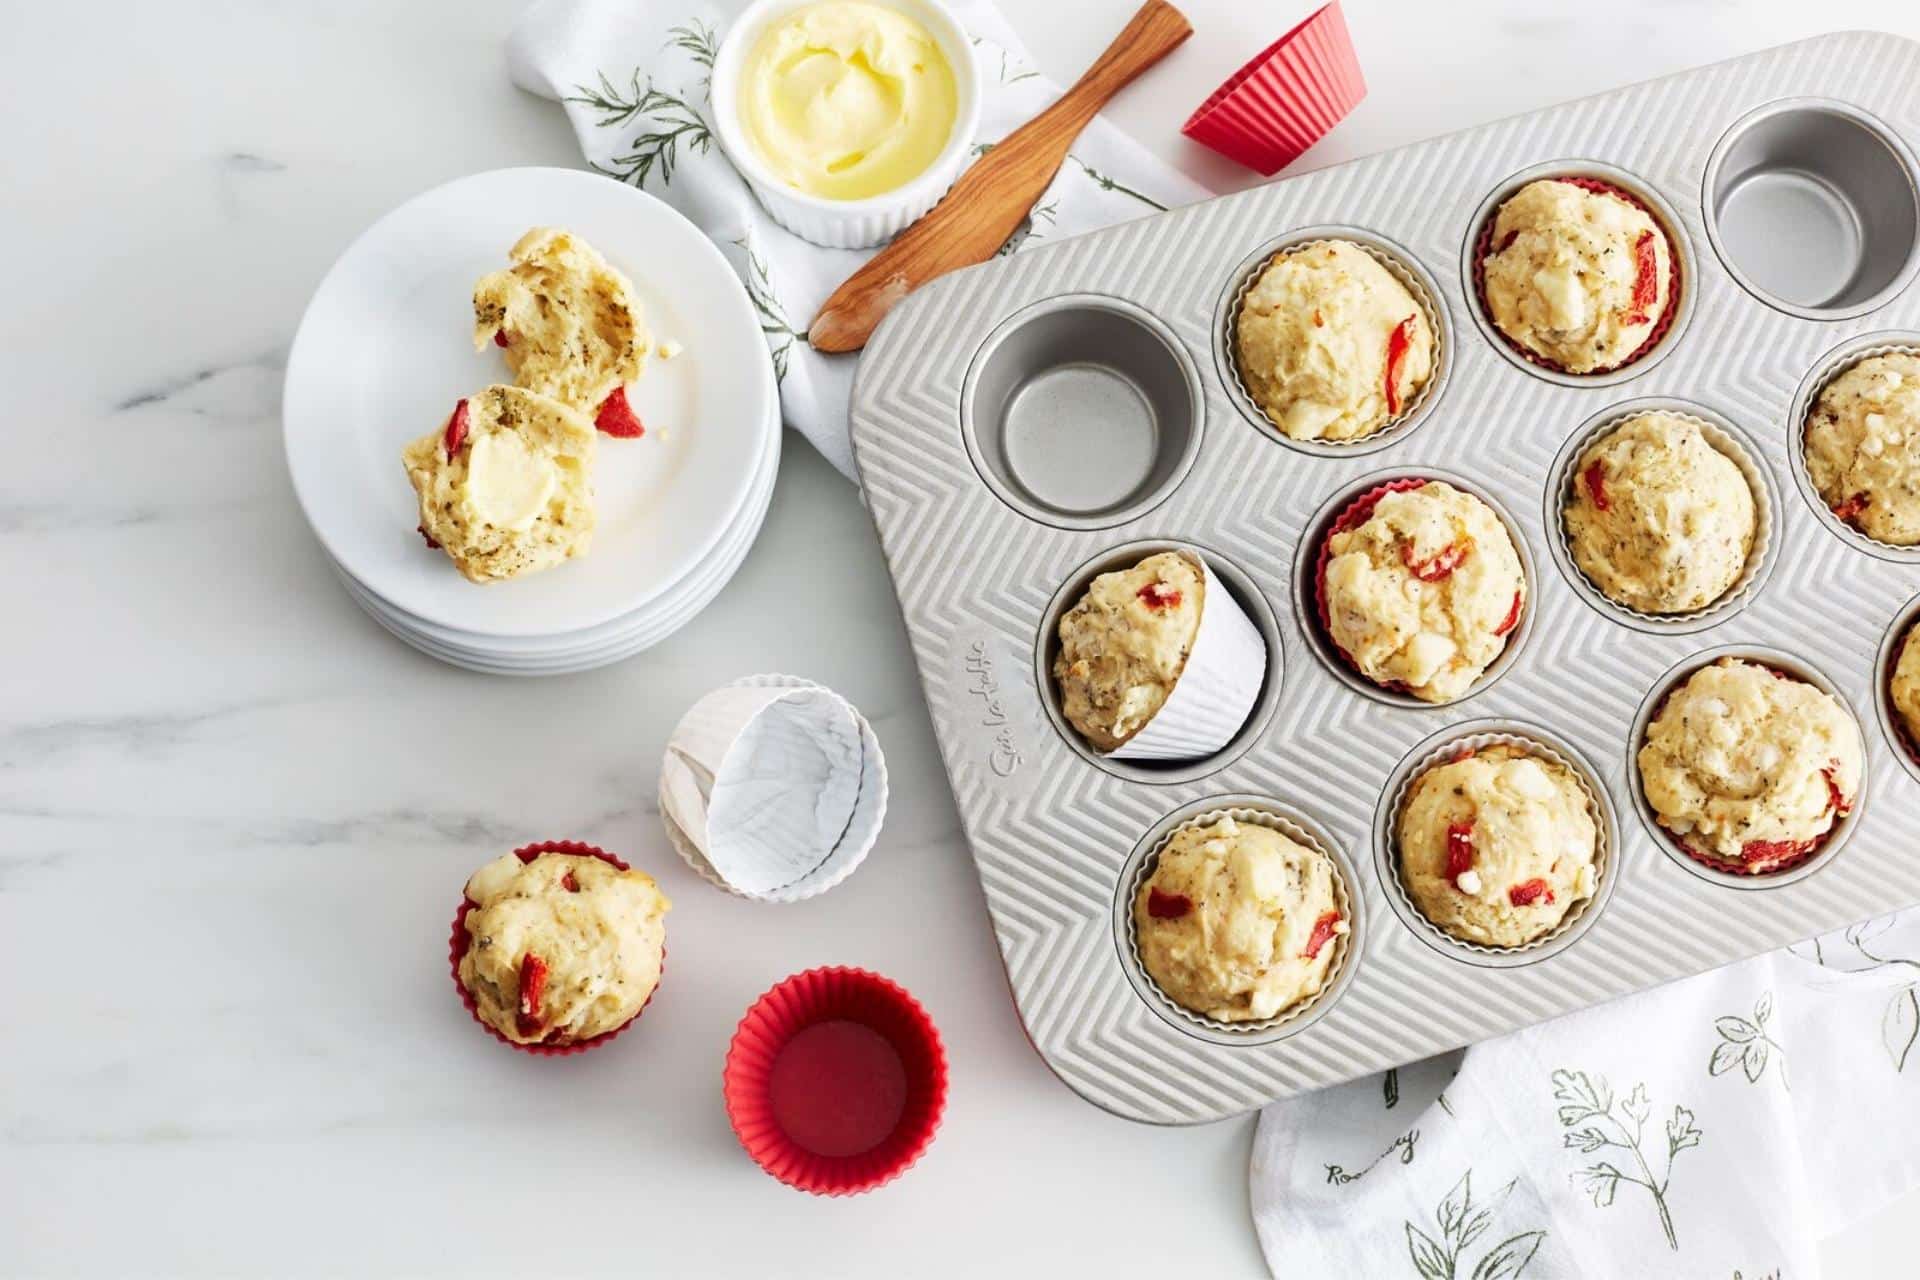 Make bakery worth muffins at home